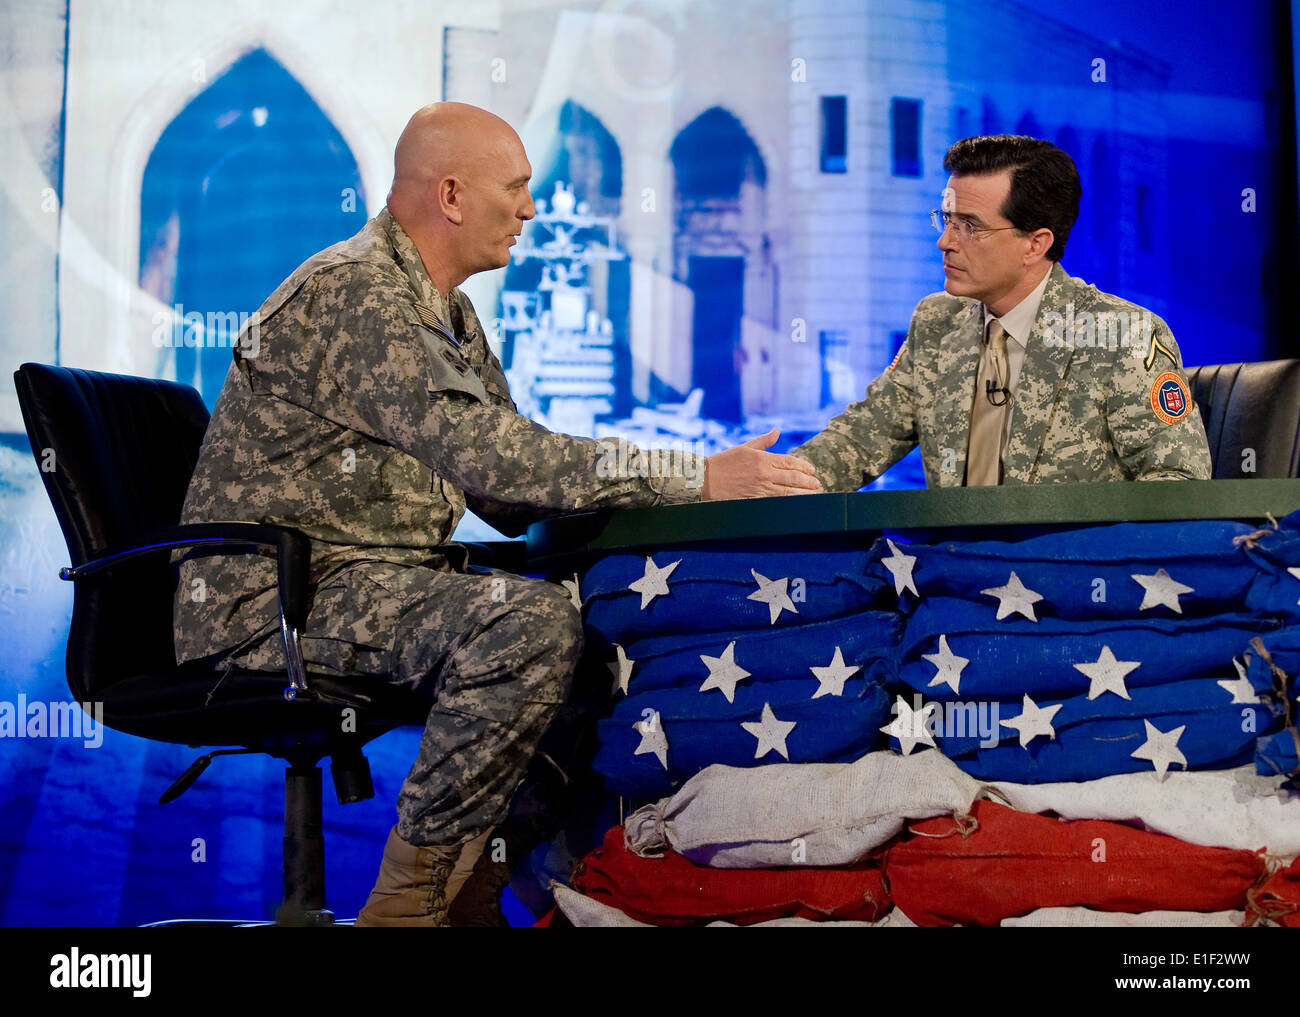 Television star Stephen Colbert interviews Commanding General of the Multi-National Force-Iraq, US Army General Ray Odierno, during broadcast from the Al Faw Palace June 7, 2009 in Baghdad, Iraq. Stock Photo